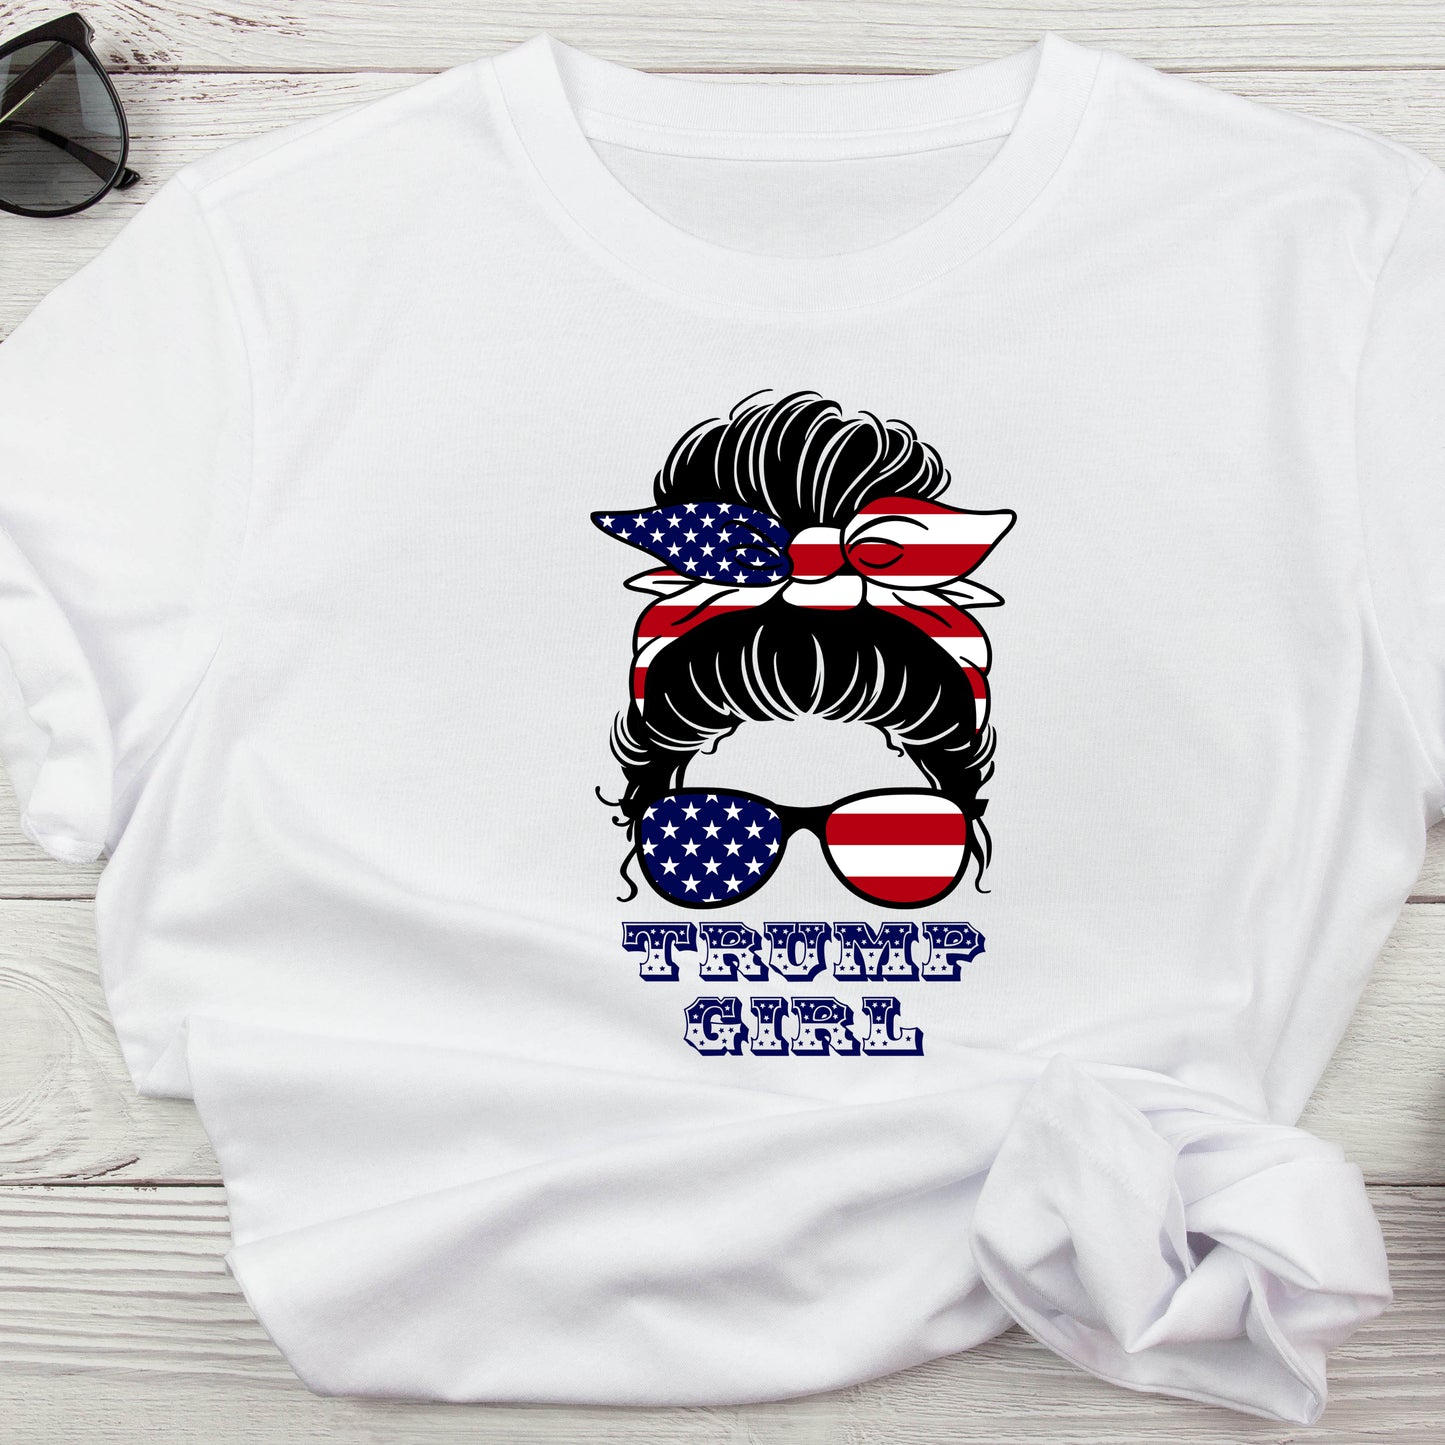 Trump Girl T-Shirt Conservative TShirt Patriotic Shirt For Conservative Women Messy Bun T Shirt Mother's Day Gift Conservative Gift Idea